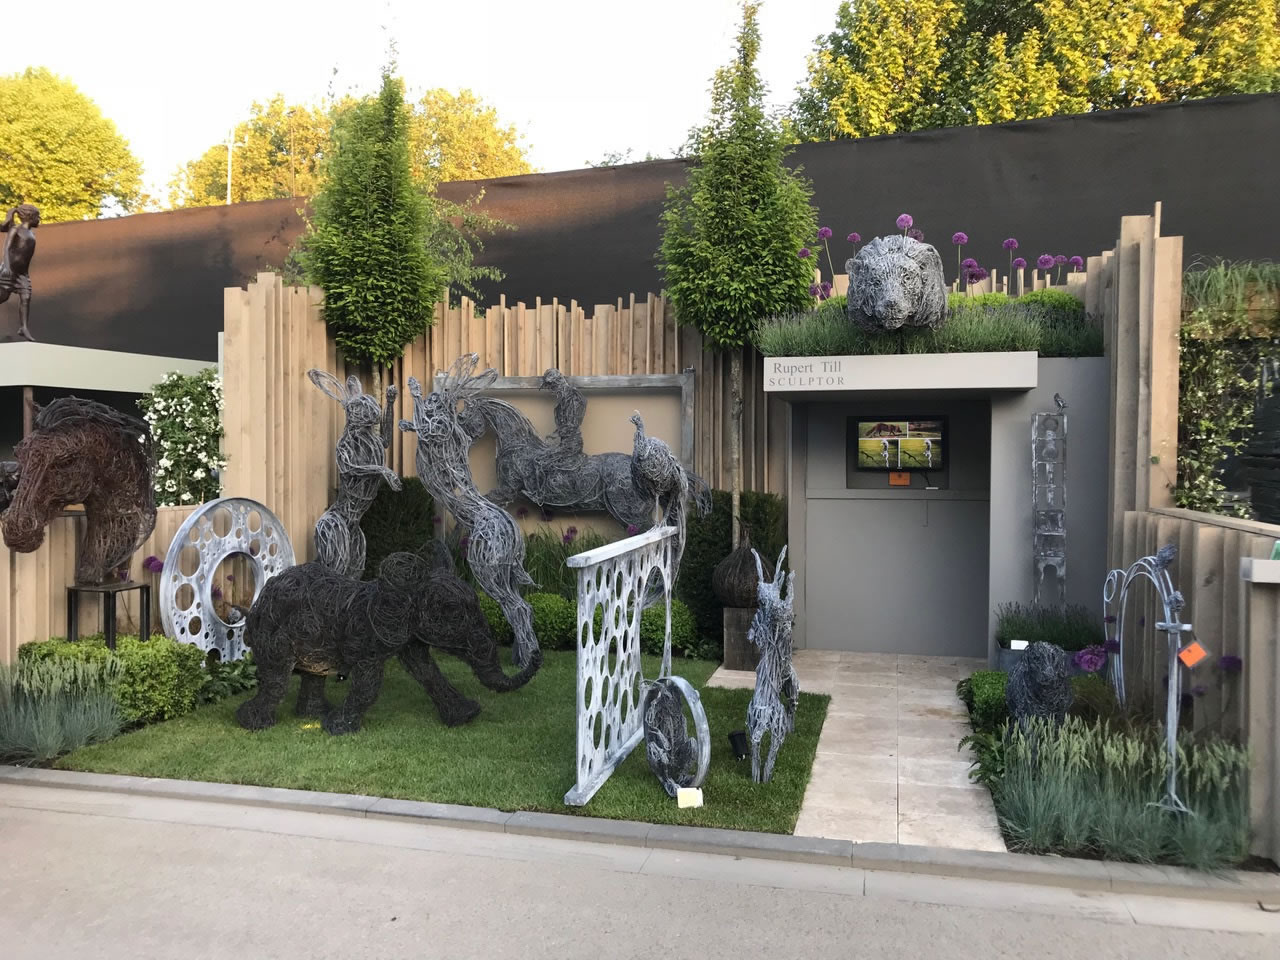 Come and visit me in my usual spot on Stand RGB8 at this year's Chelsea Flower Show